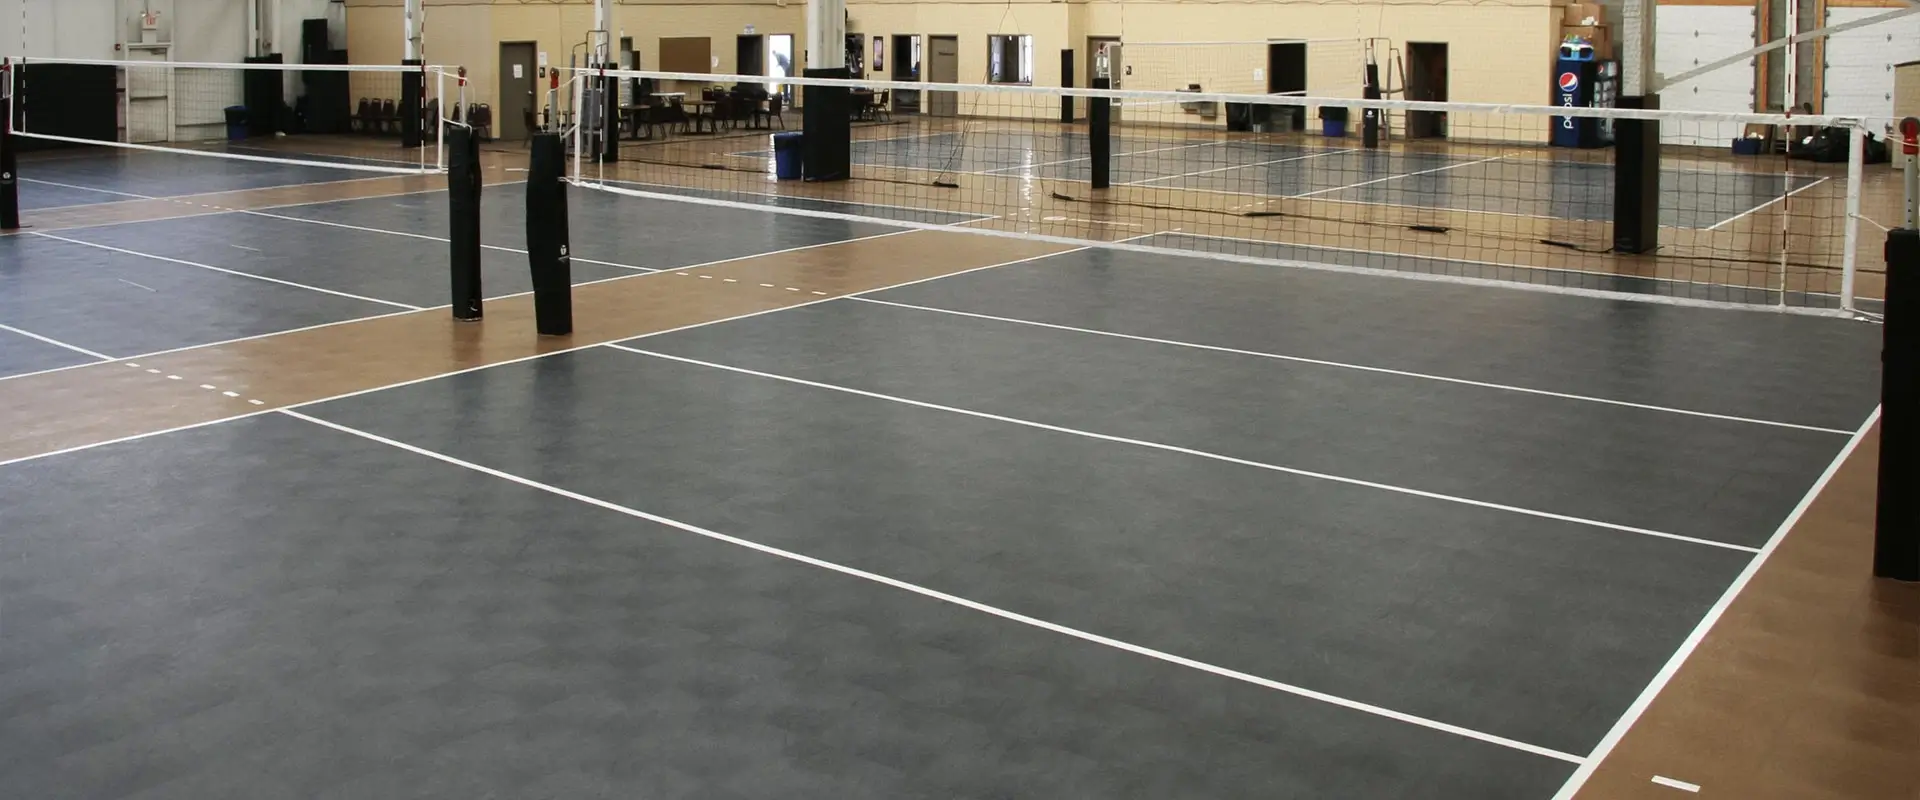 Volleyball facility with SnapSports 50-50 flooring